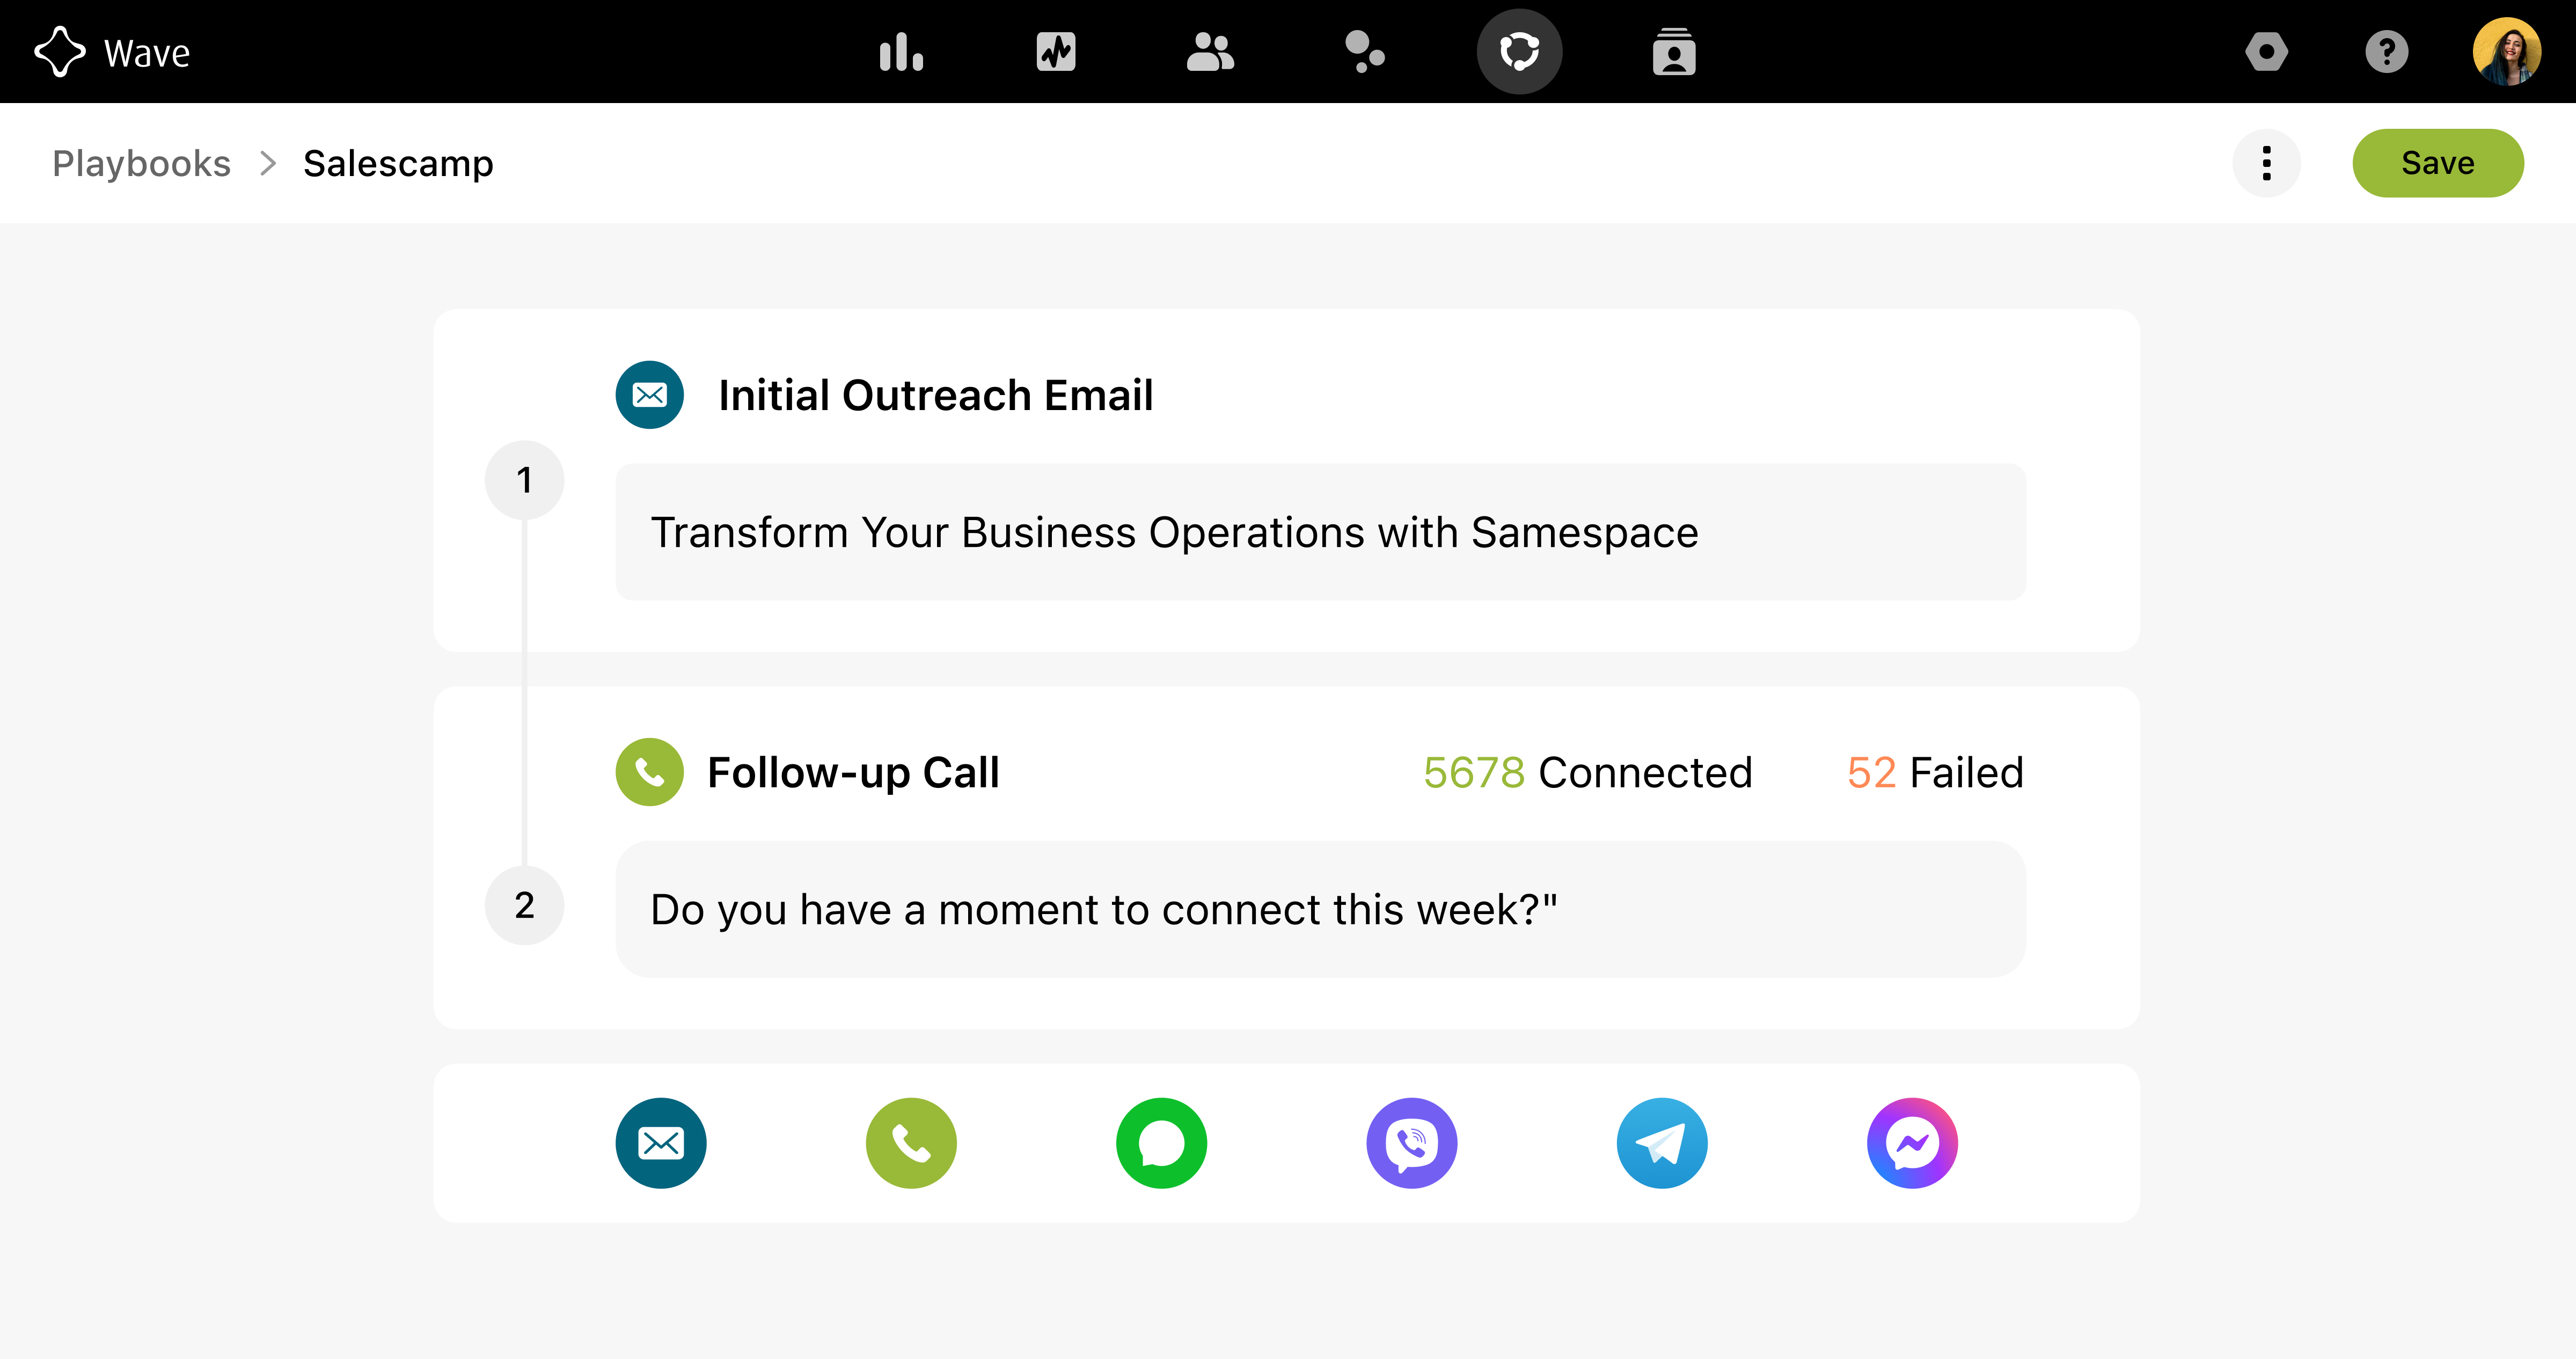 A sales engagement playbook on Wave's platform, displaying a sequential flowchart with an initial outreach email and a follow-up call, including success metrics for calls connected and calls failed.